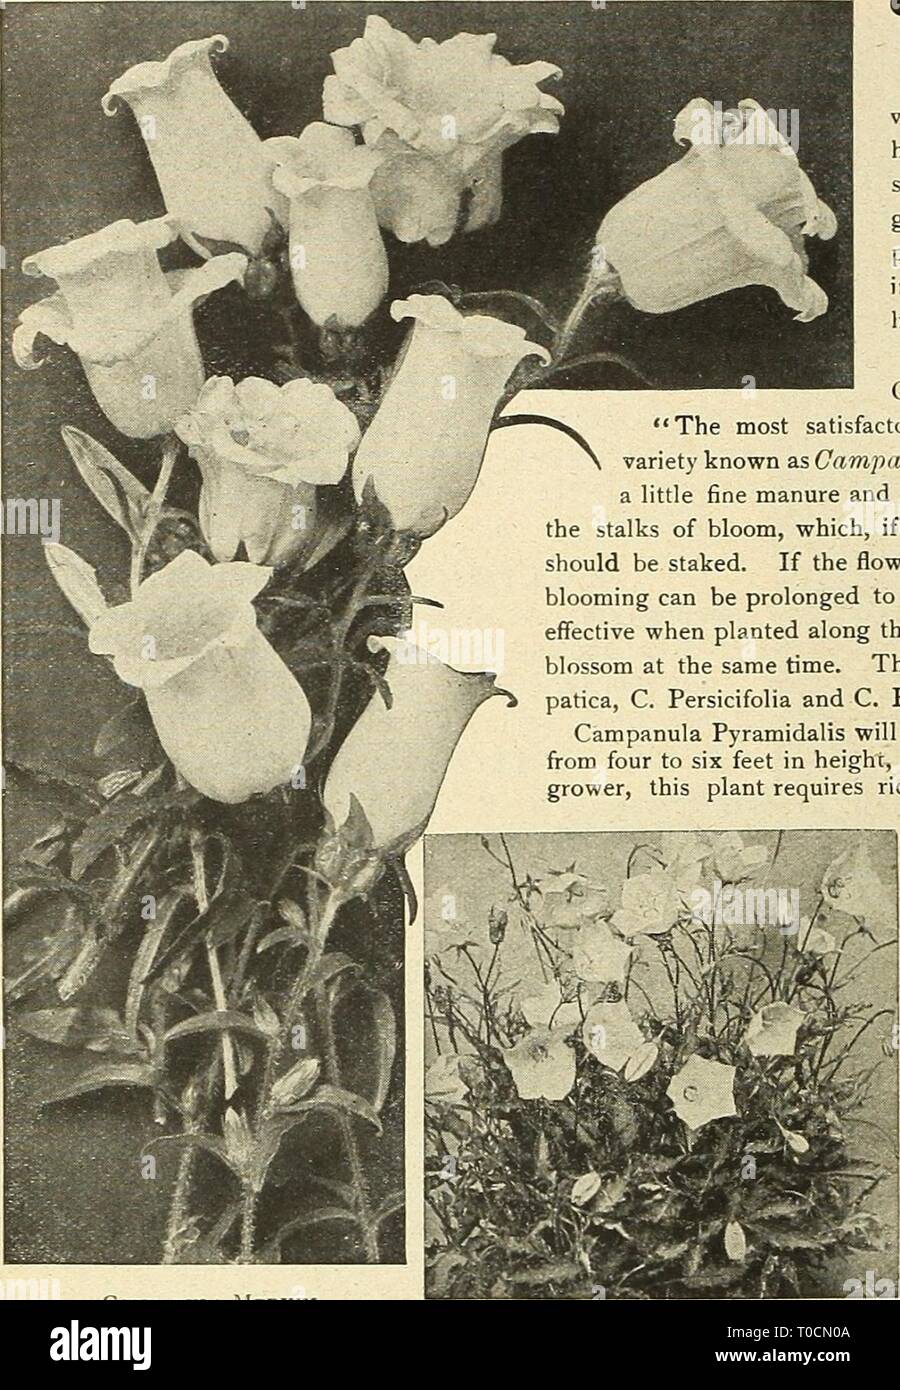 Dreer's garden book 1916 (1916) Dreer's garden book 1916 dreersgardenbook1916henr Year: 1916  206    Campanula Medium (Canterbury Bells) CAMPANULAS, or, BELLFOWERS. Indispensable hardy garden flowers, of much variety of form, some being of tall and imposing habit, while others are dwarf, compact little plants, suitable for edging, rockwork, etc. x They like a good rich soil, and last much longer in bloom if planted in a half-shady place. All of the taller-grow- ing kinds should be staked to prevent injury from high winds. Mrs. Ely, the author of 'A Woman's Hardy Garden,' says: 'The most satisf Stock Photo